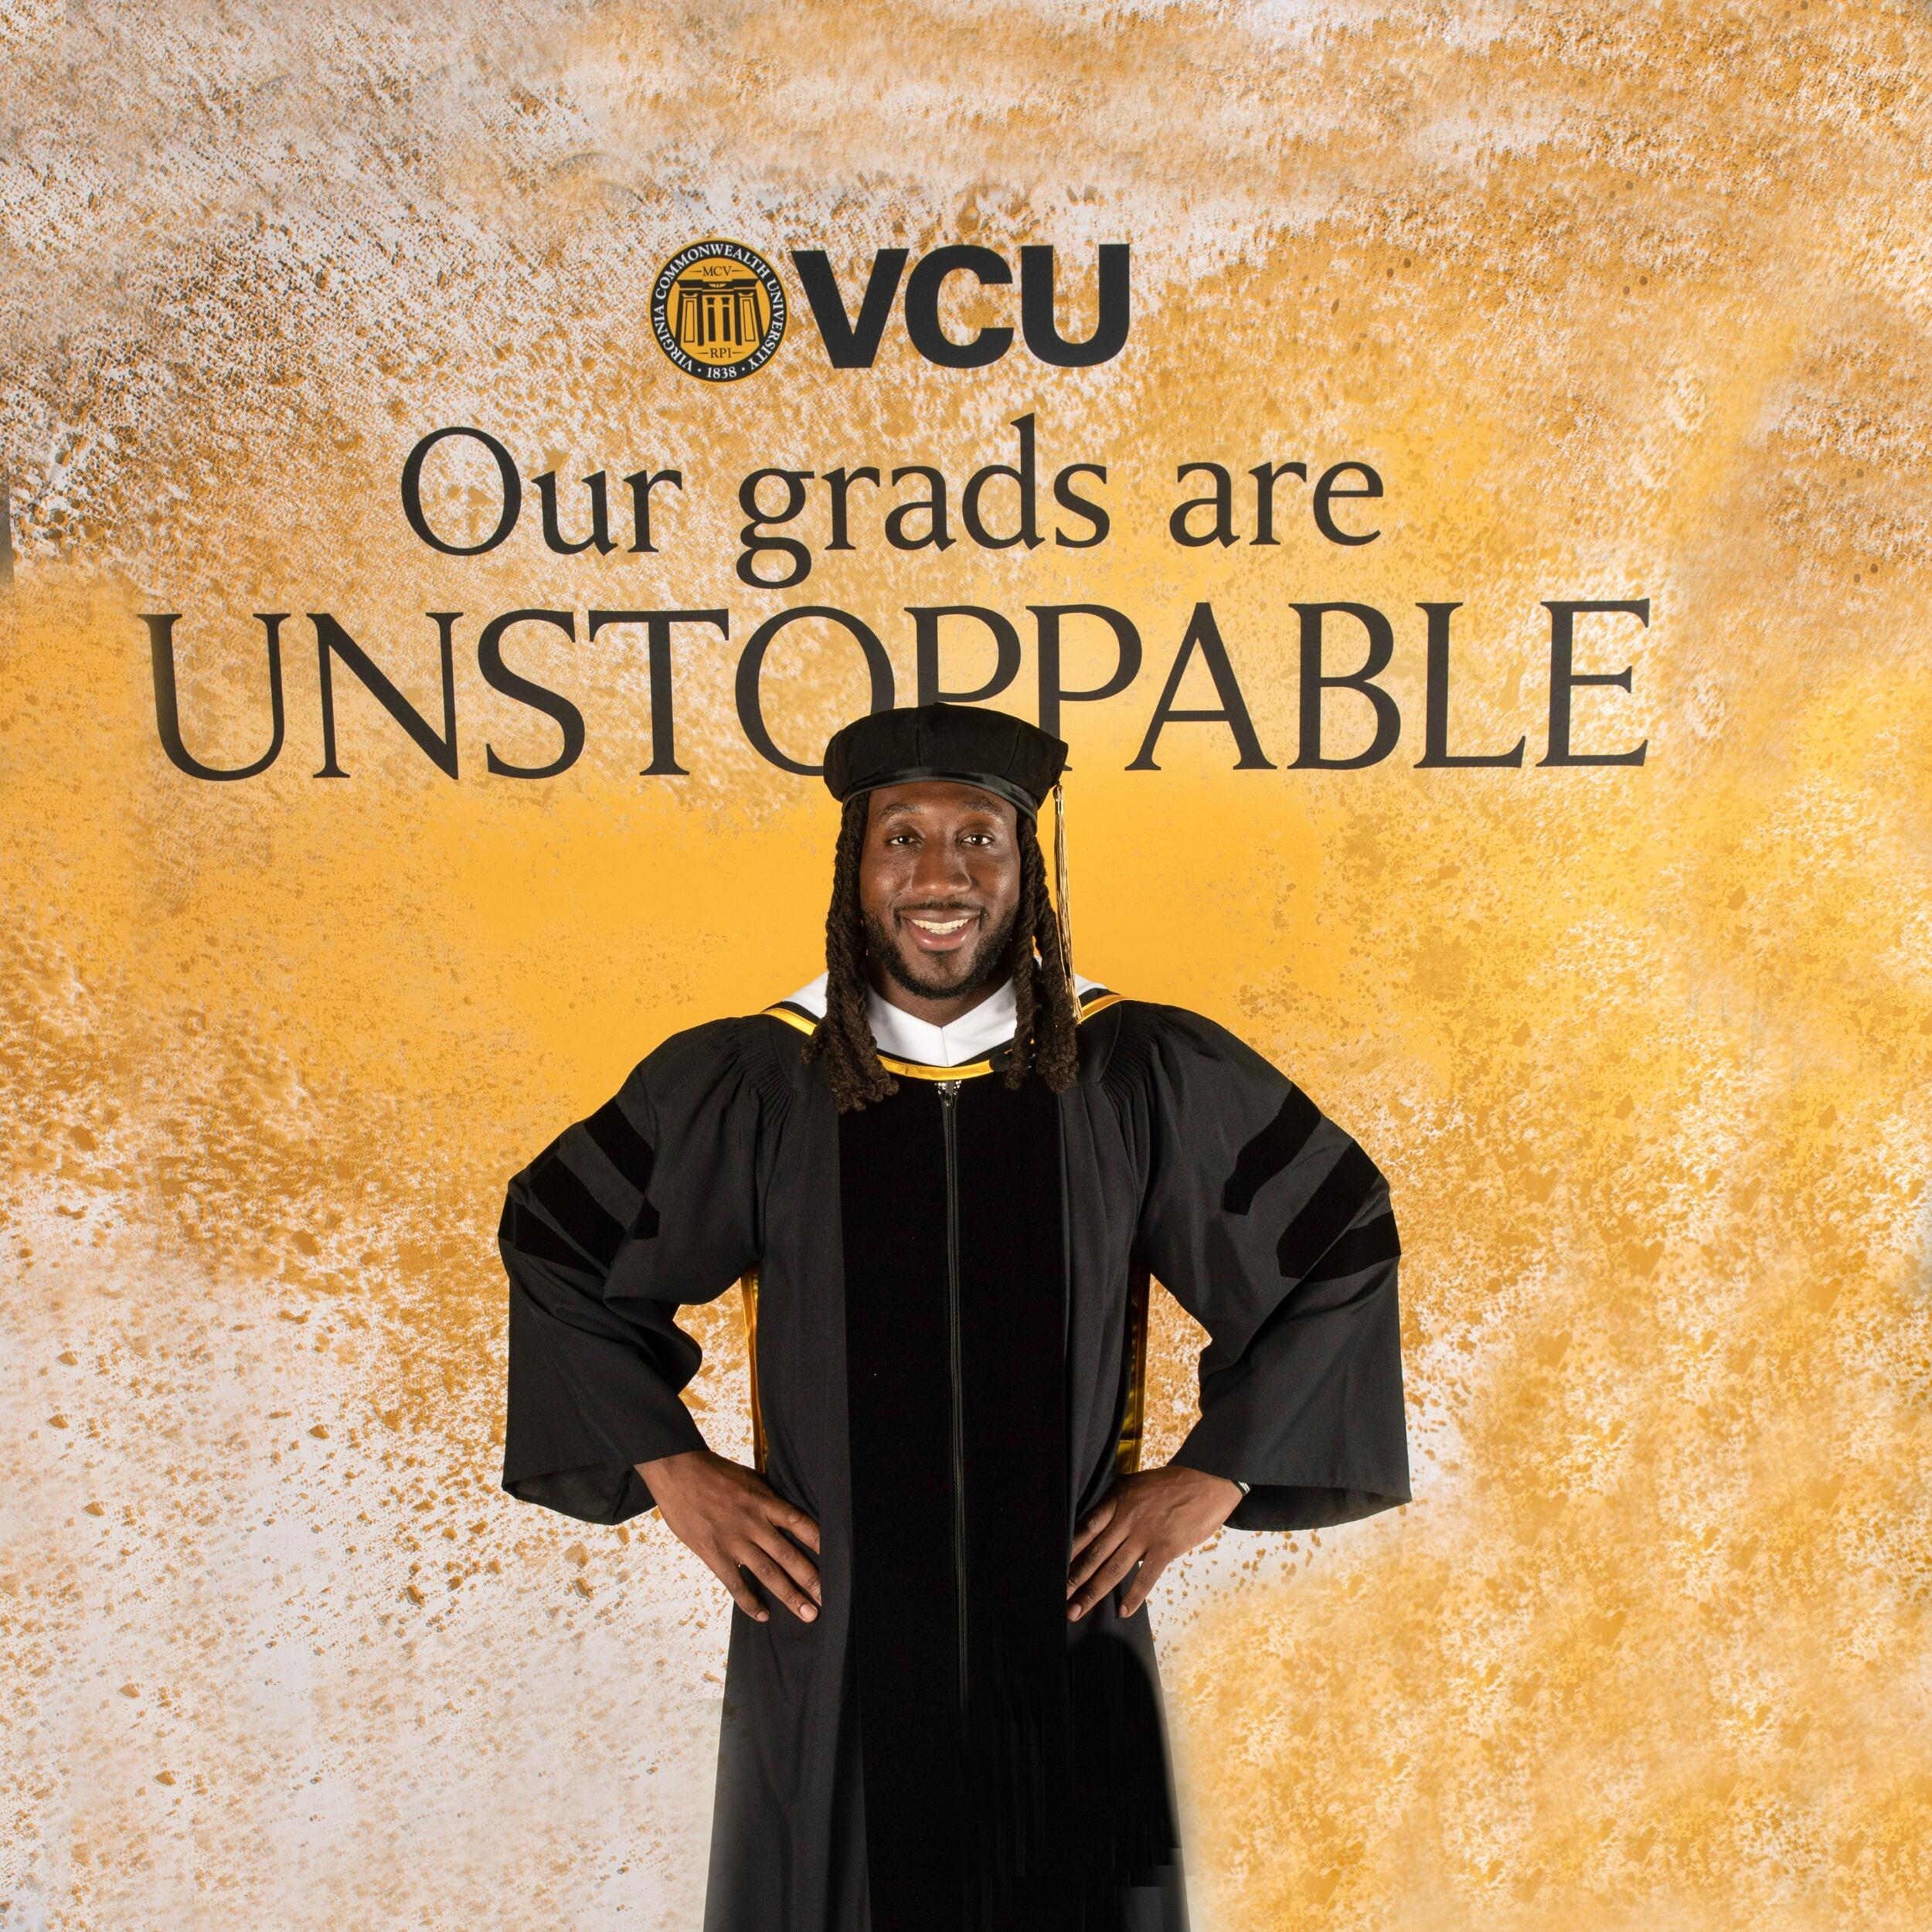 A photo of a man wearing a cap and gown standing with is hands on his hips. Behind him is black text that reads \"VCU Our grads are UNSTOPPABLE\"